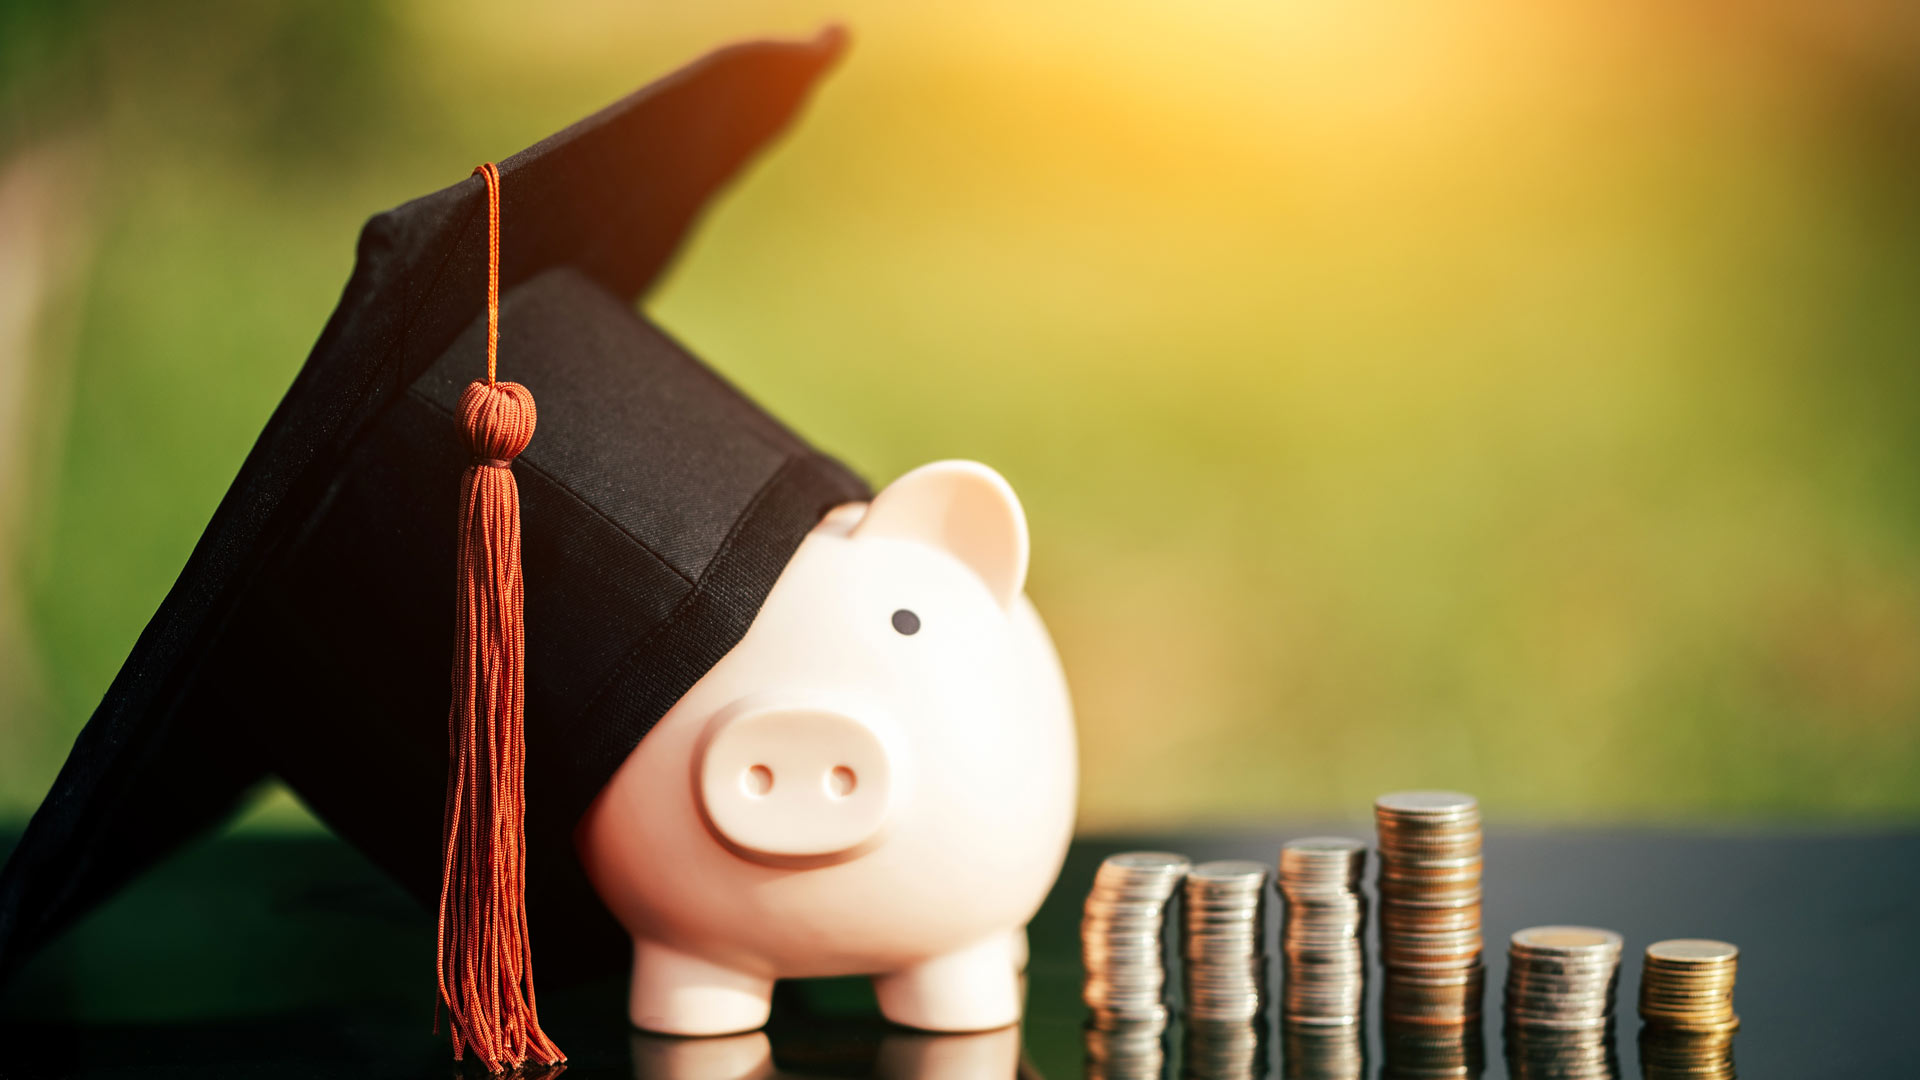 image of a piggy bank wearing a graduation mortarboard